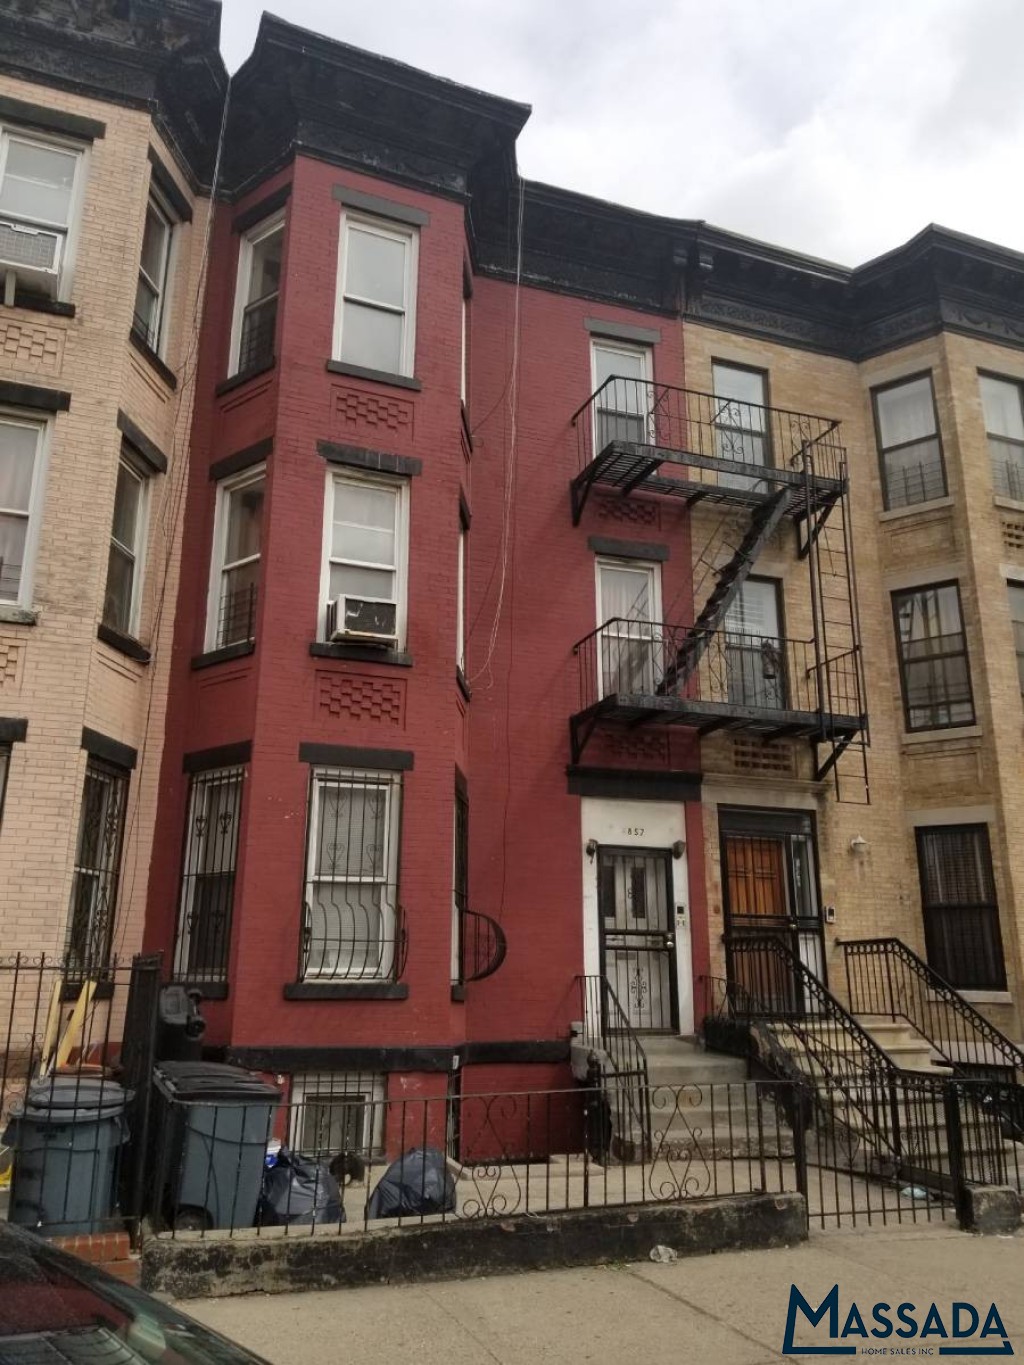 1857 Park Place Crown Heights Brooklyn 11233 - Leader in Selling Houses ...